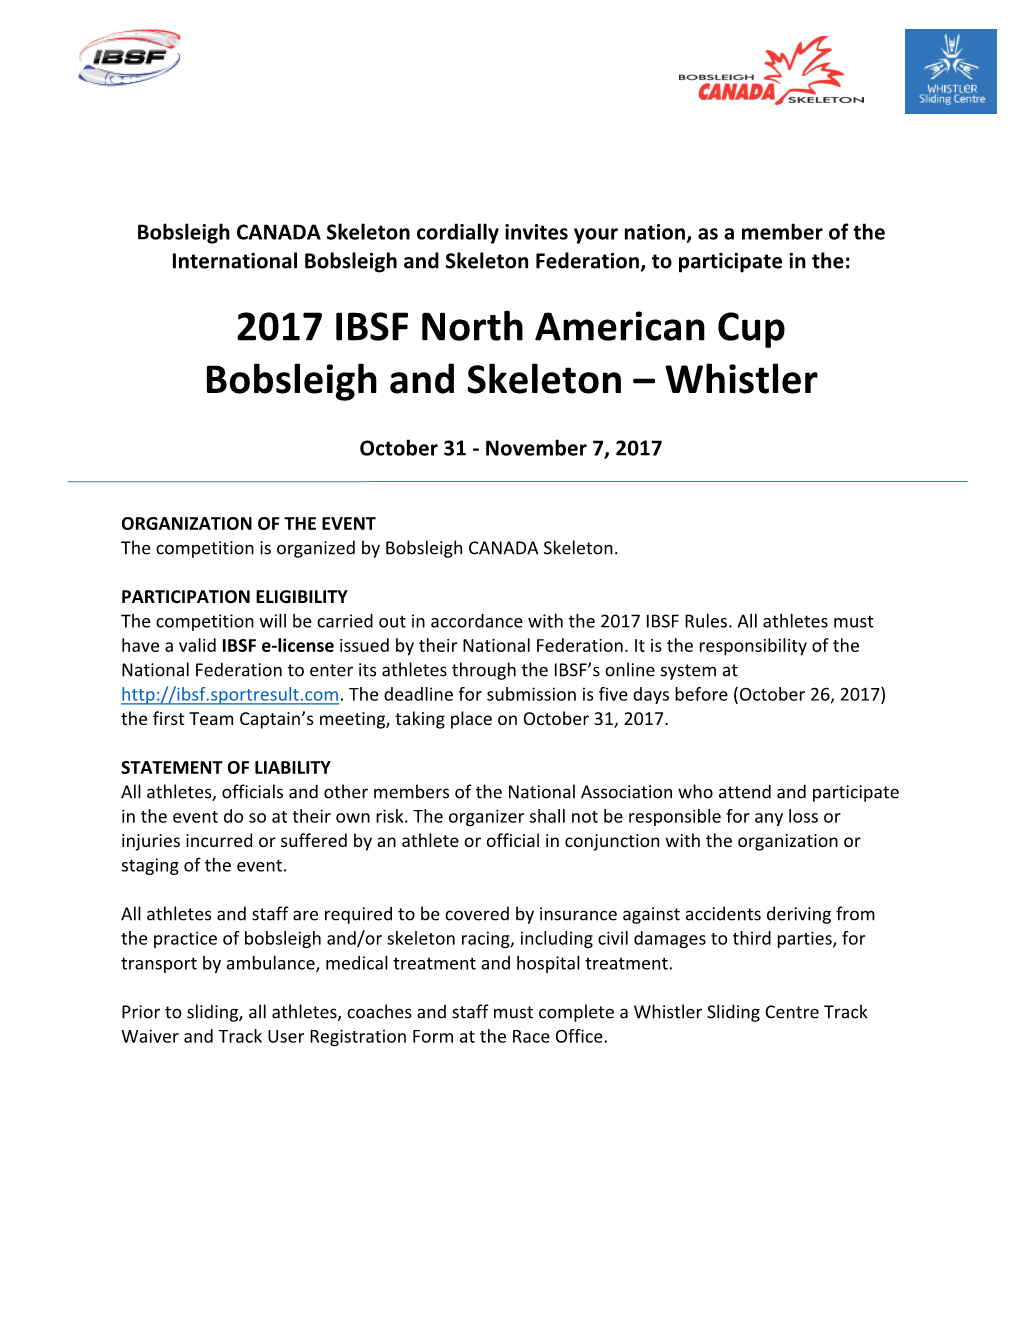 2017 IBSF North American Cup Bobsleigh and Skeleton – Whistler